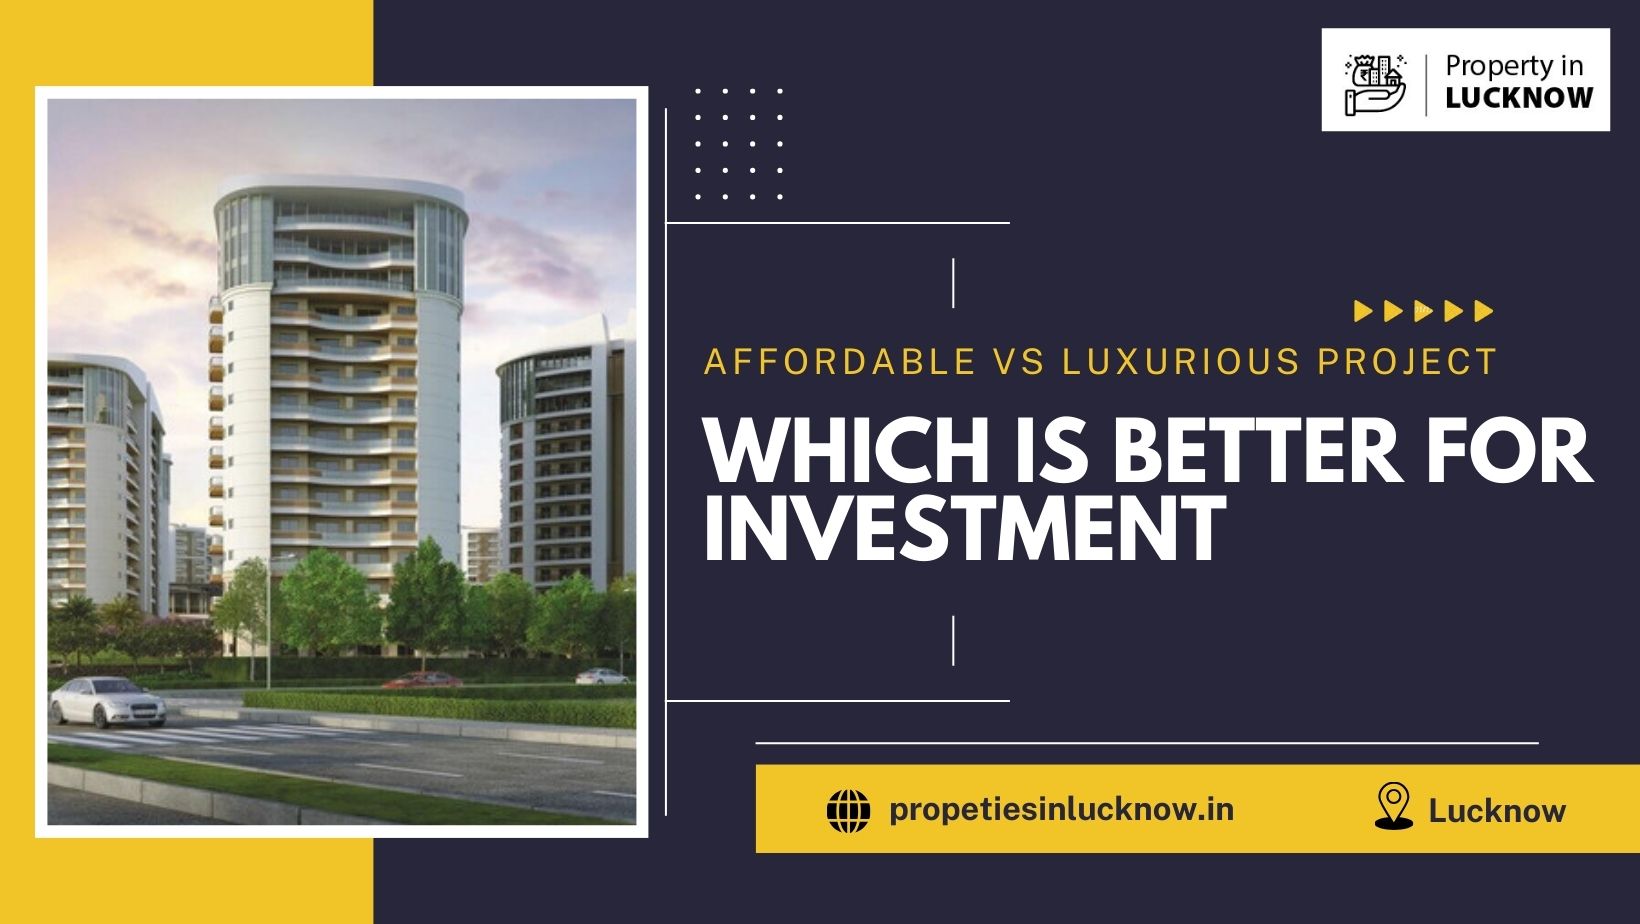 Affordable Vs Luxurious Project: Which Is Better For Investment - eWebQuest